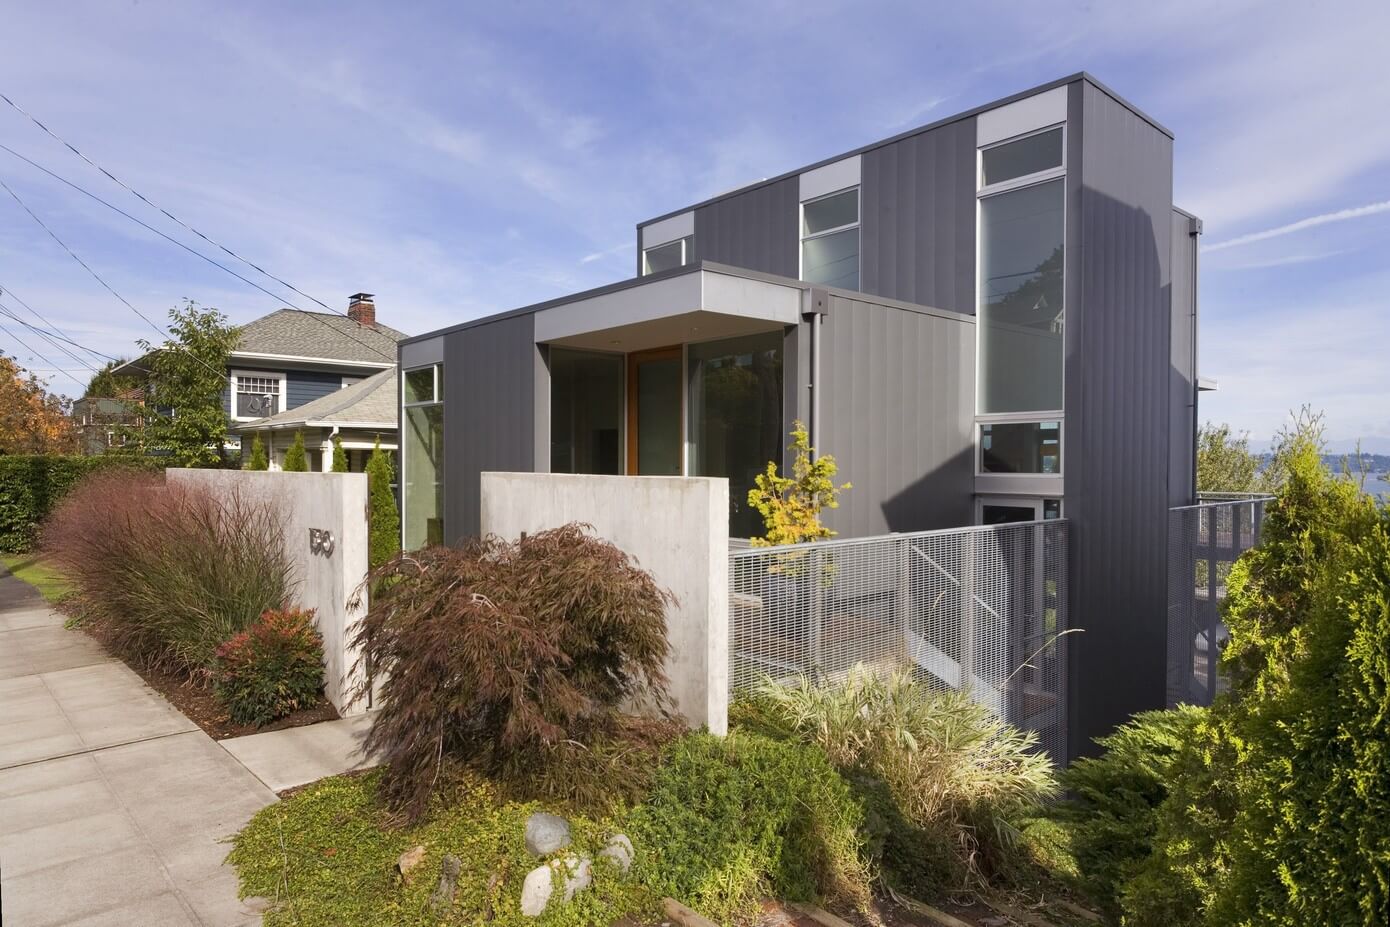 Stair House by David Coleman Architecture